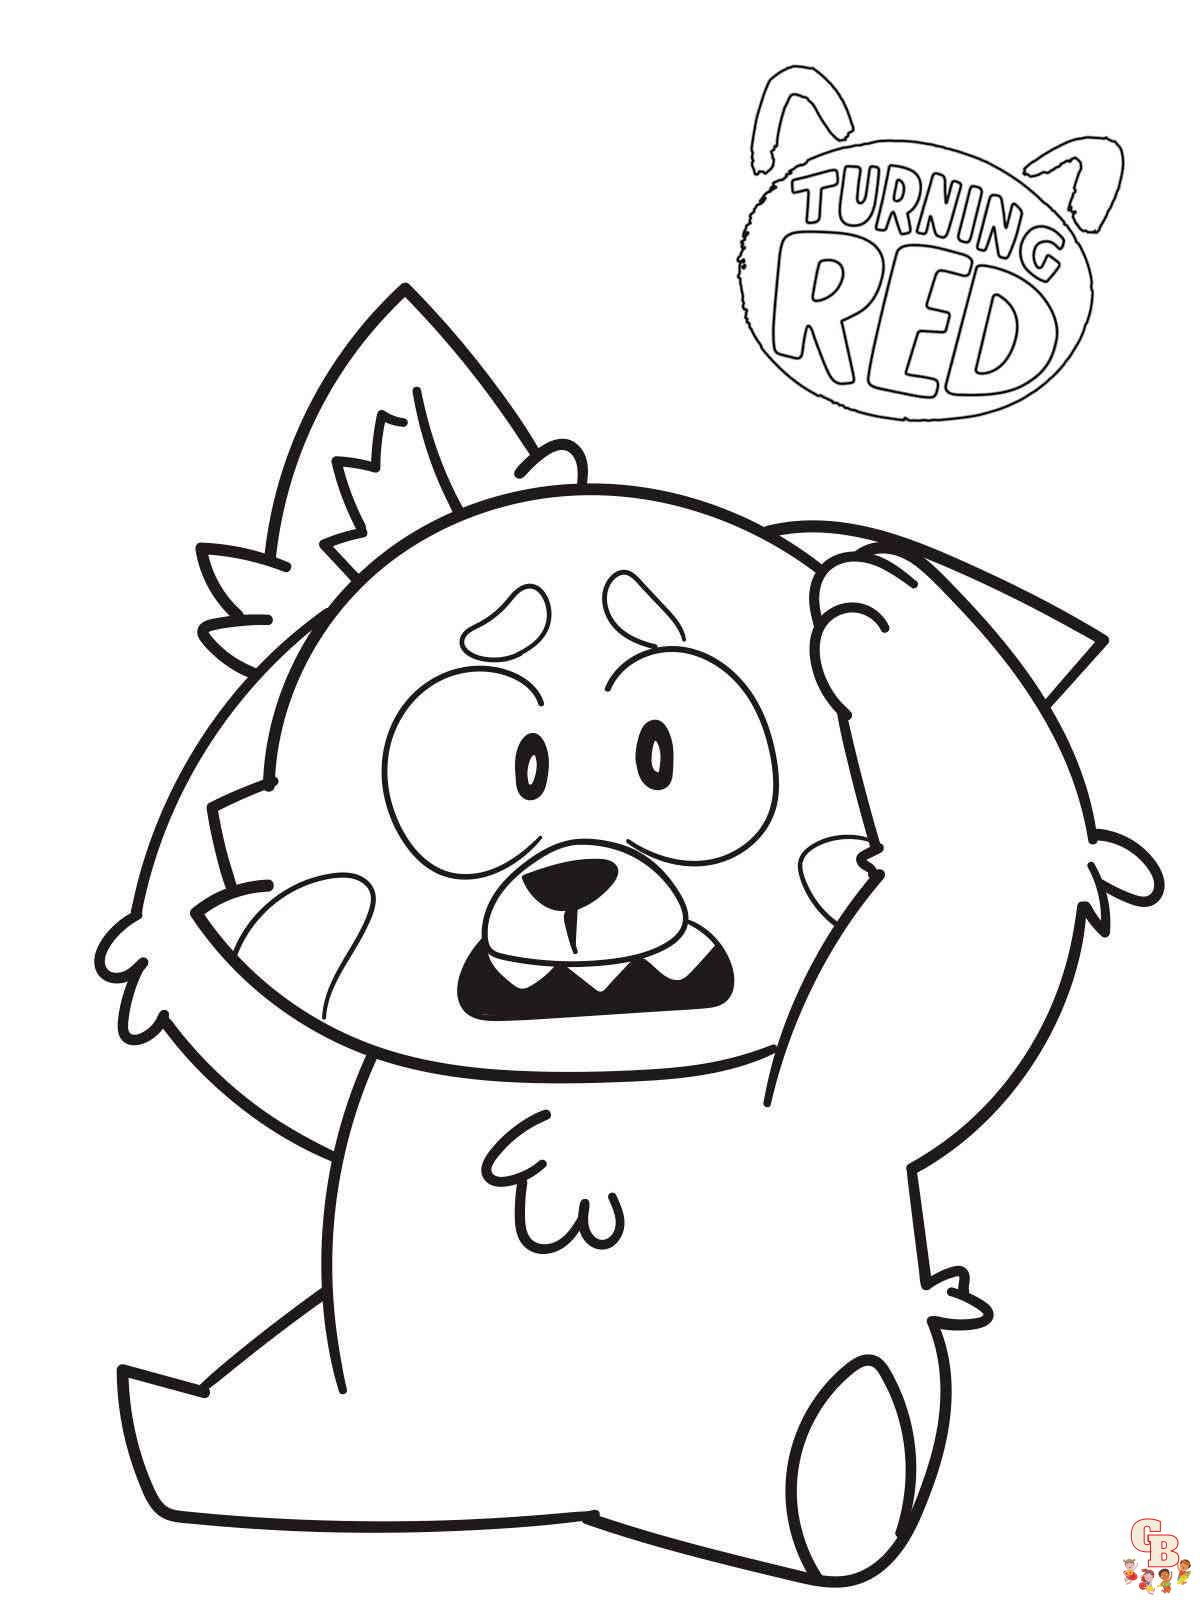 Turning Red coloring pages printable 1